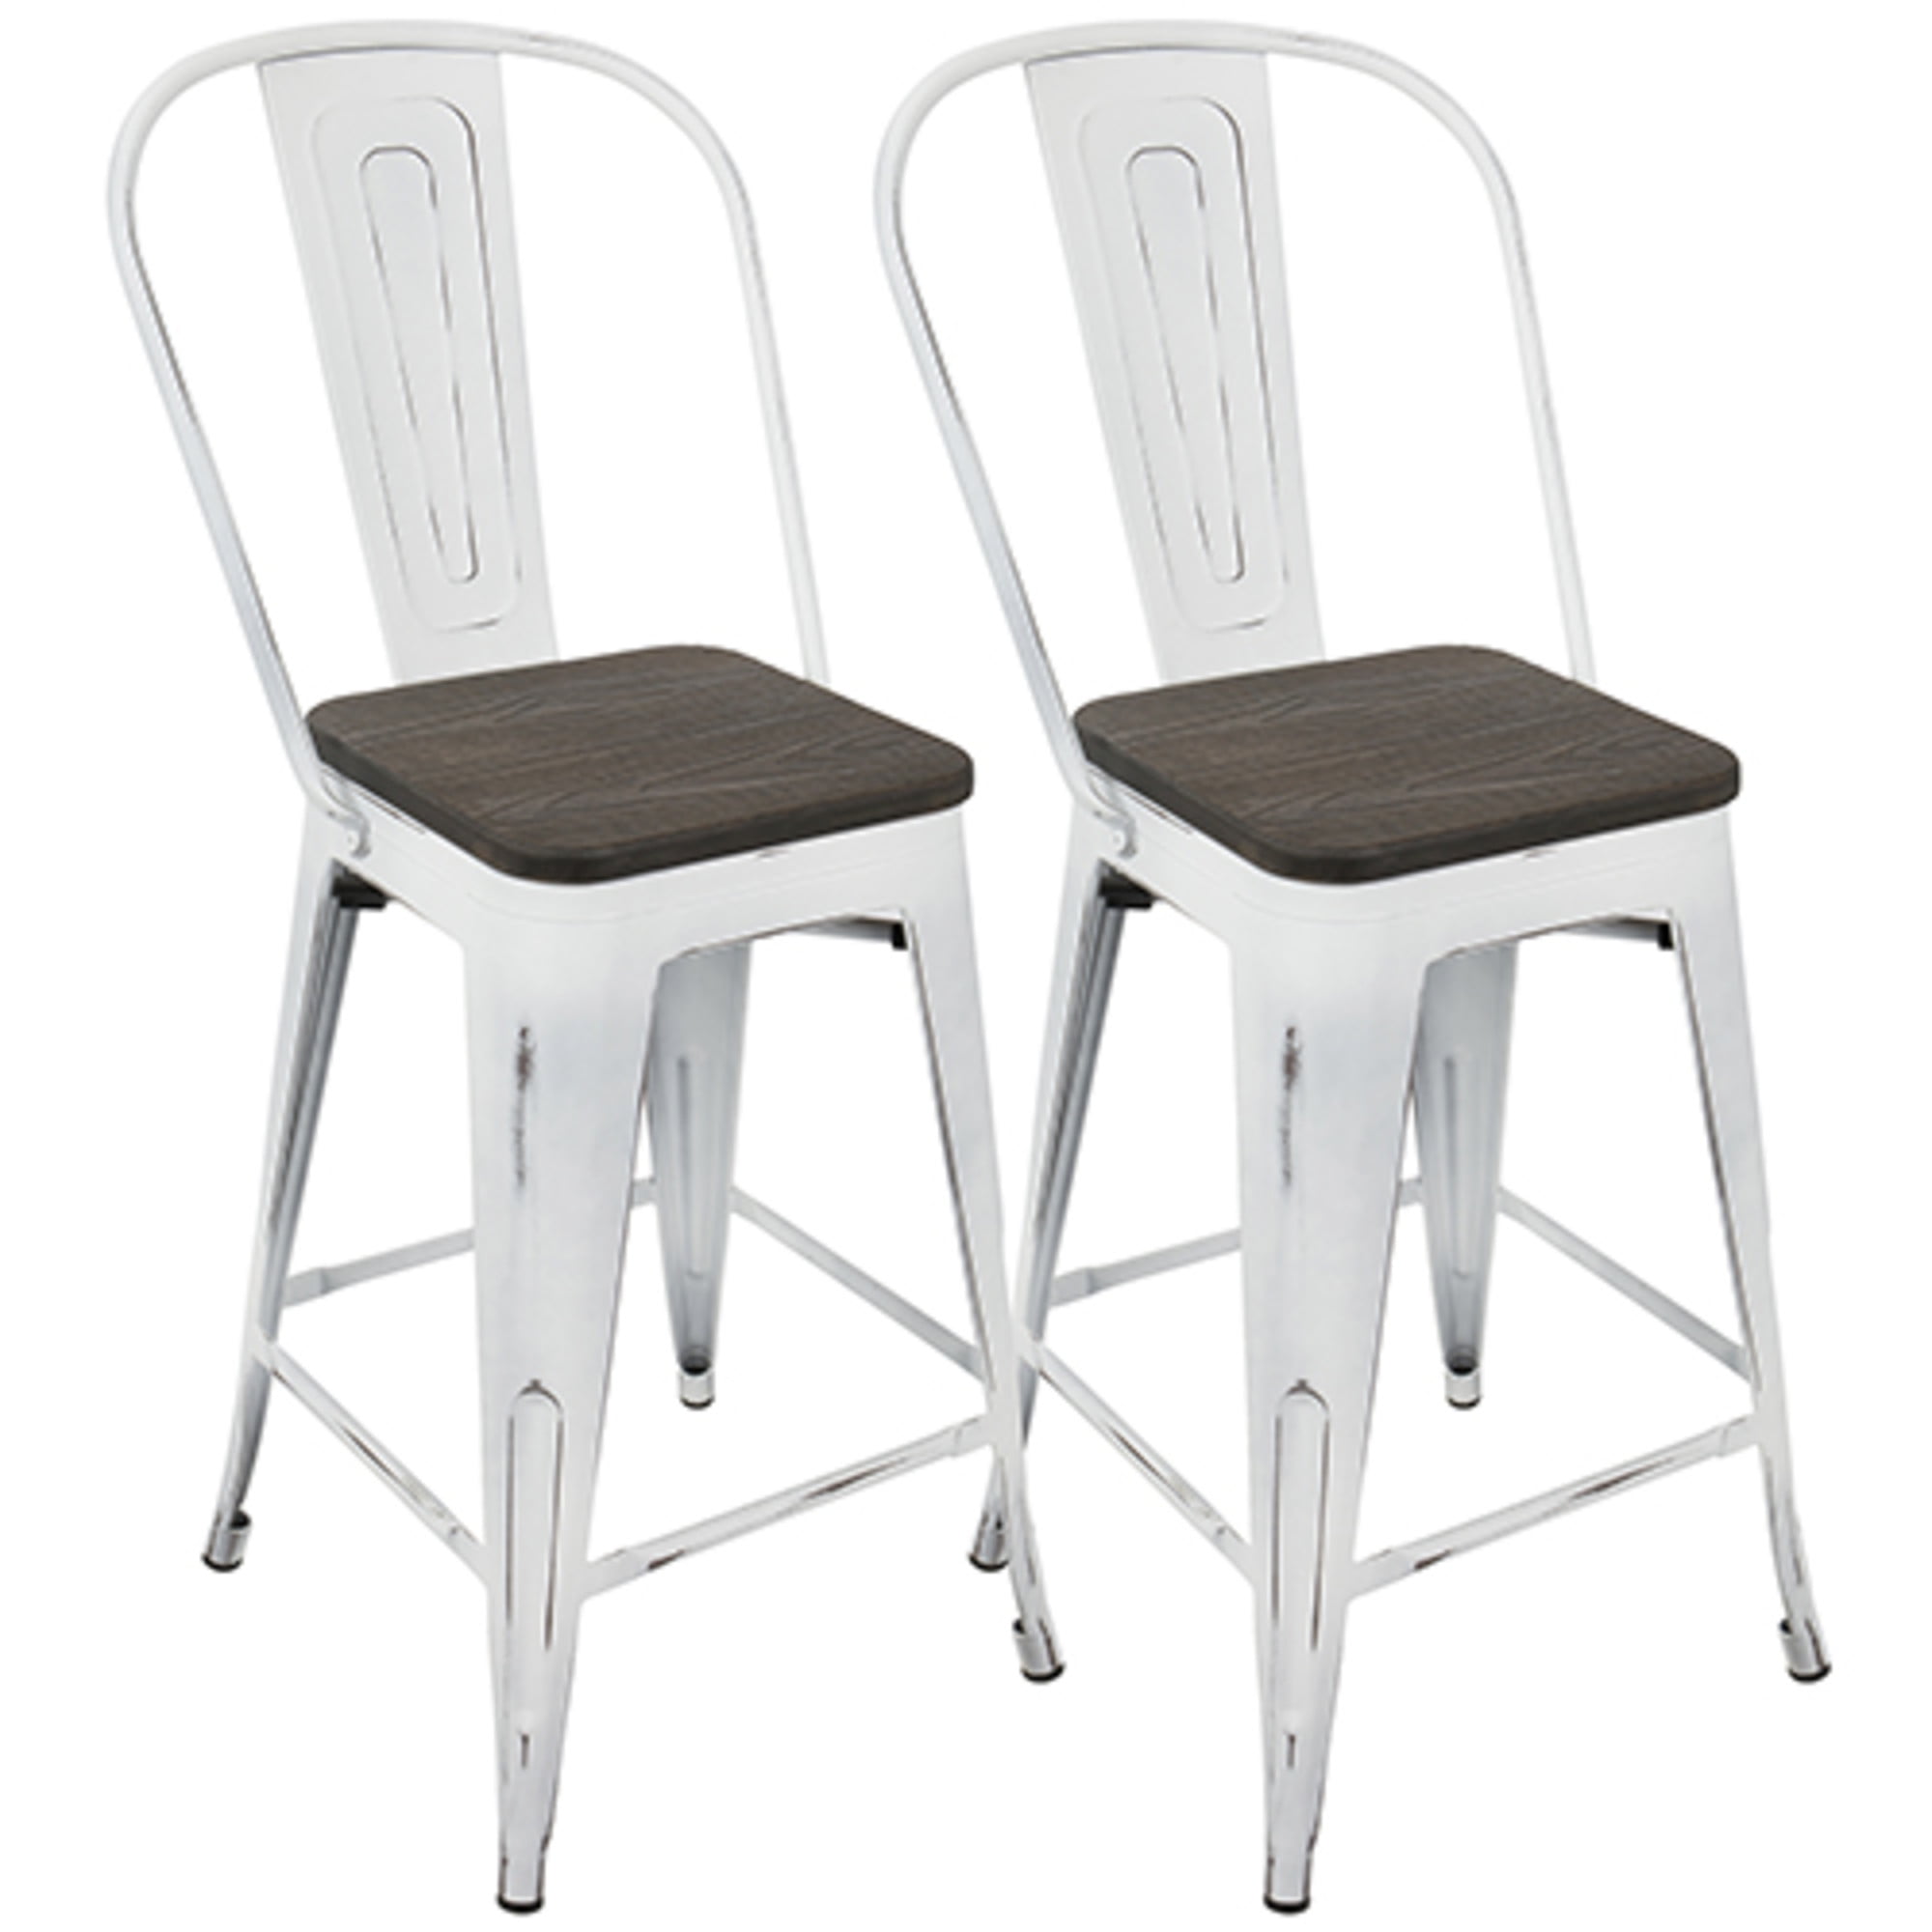 Oregon Industrial High Back Counter, White Wood High Back Bar Stools